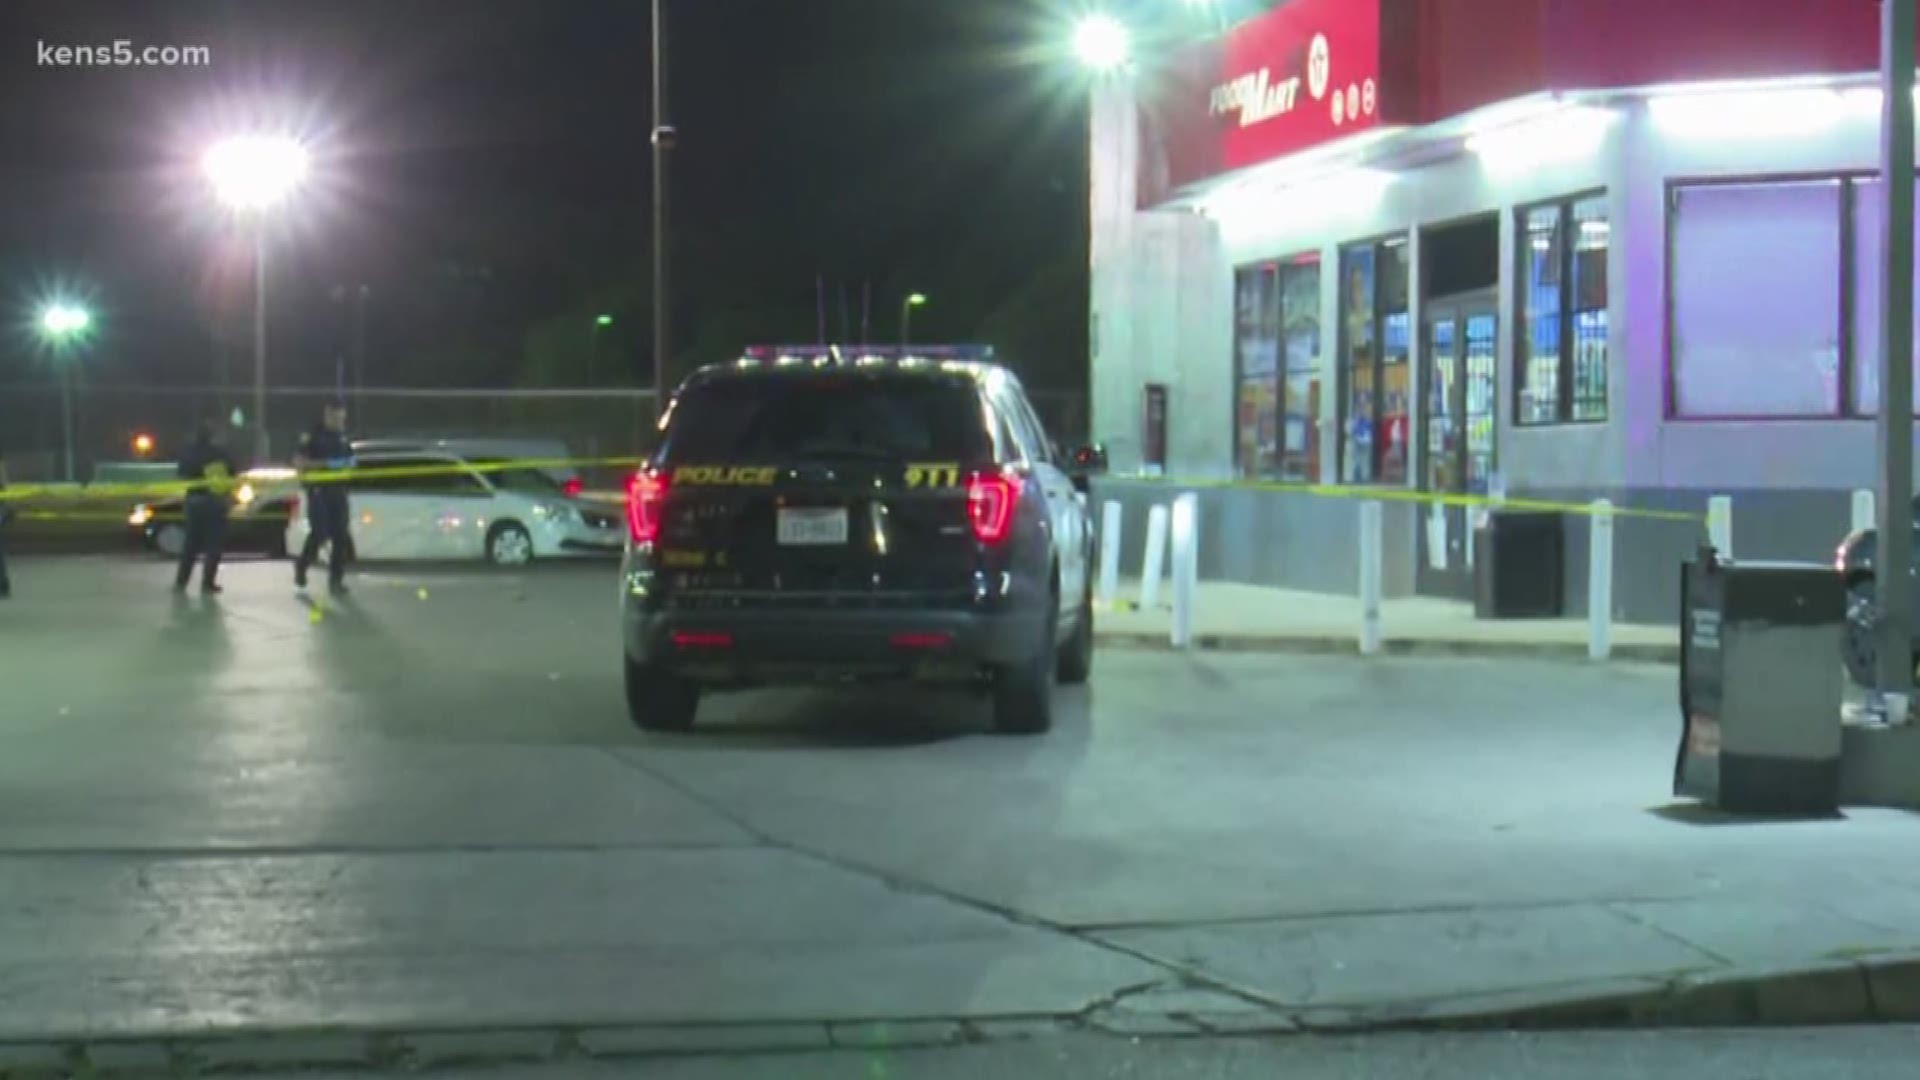 Police say the suspect and the victim got into an argument inside the gas station. The shooting happened just outside the convenience store, police say.